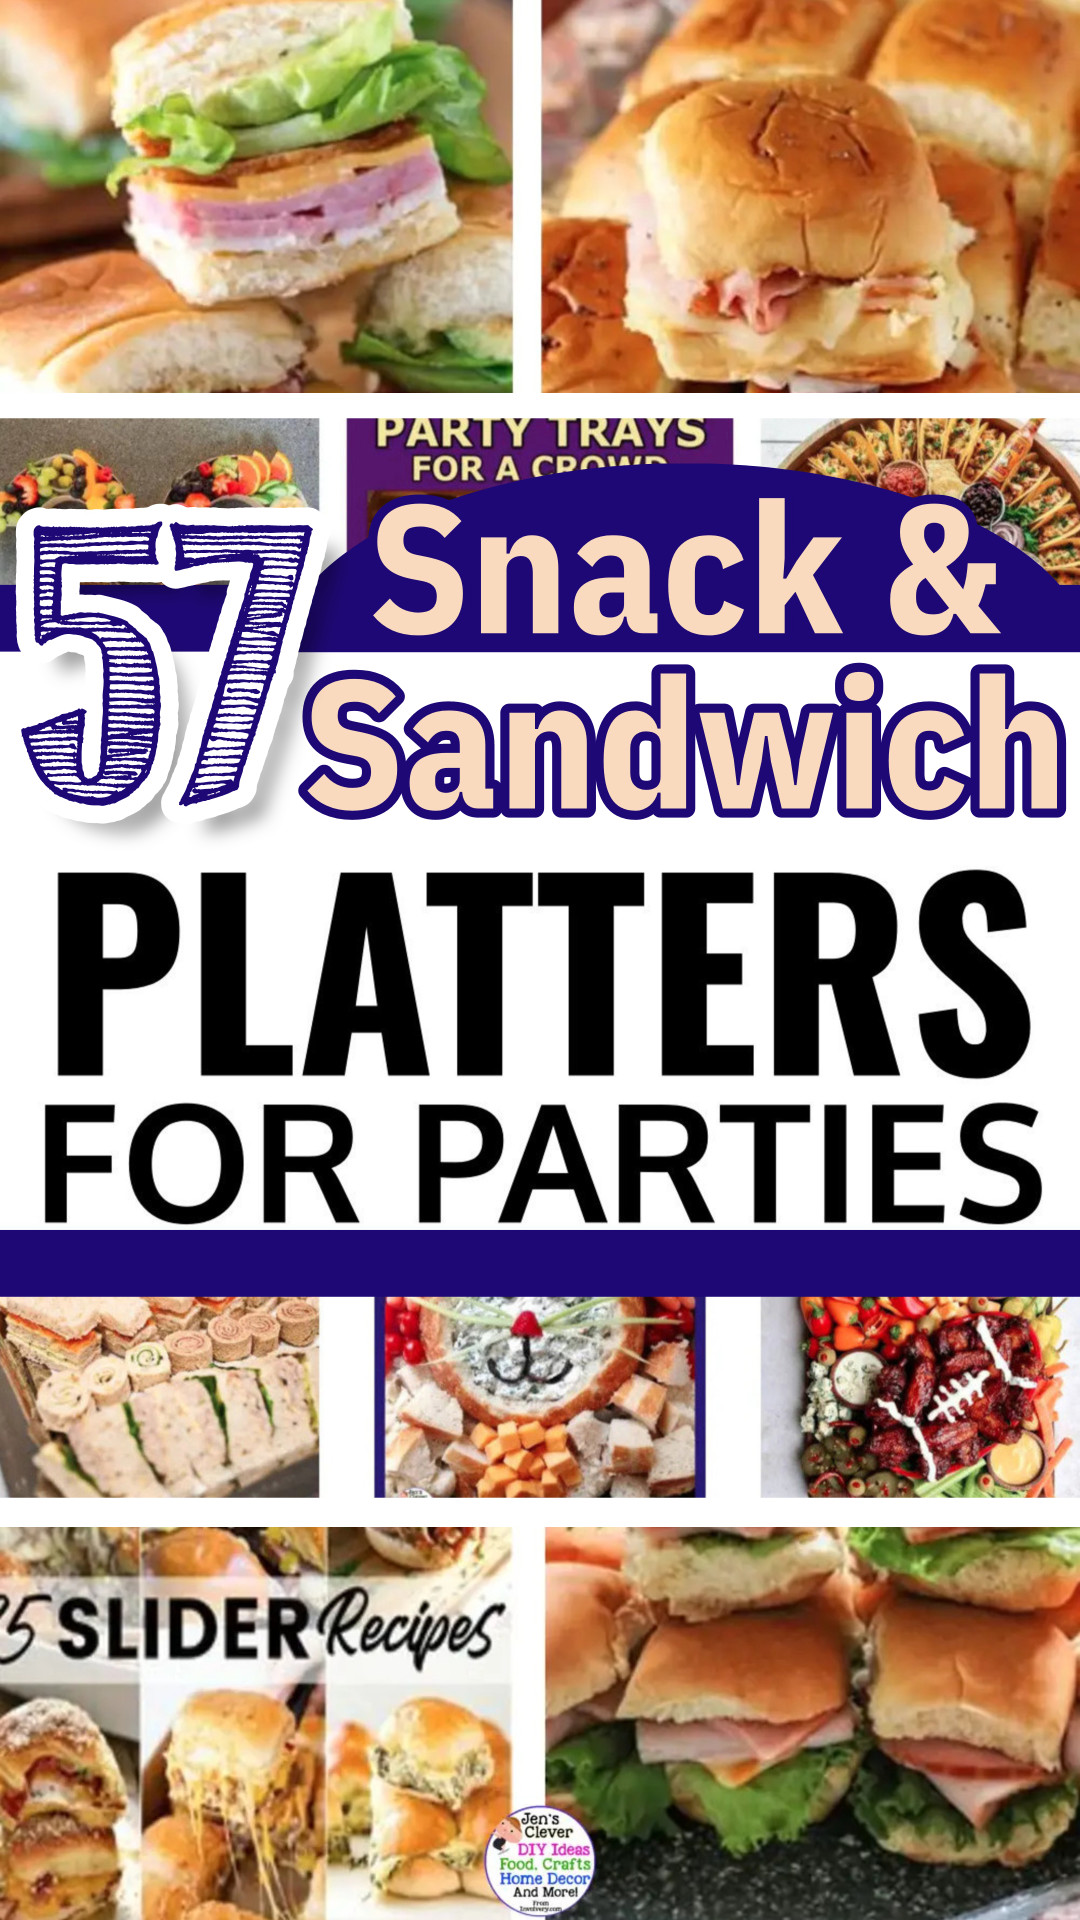 57 snack and sandwich platters for parties